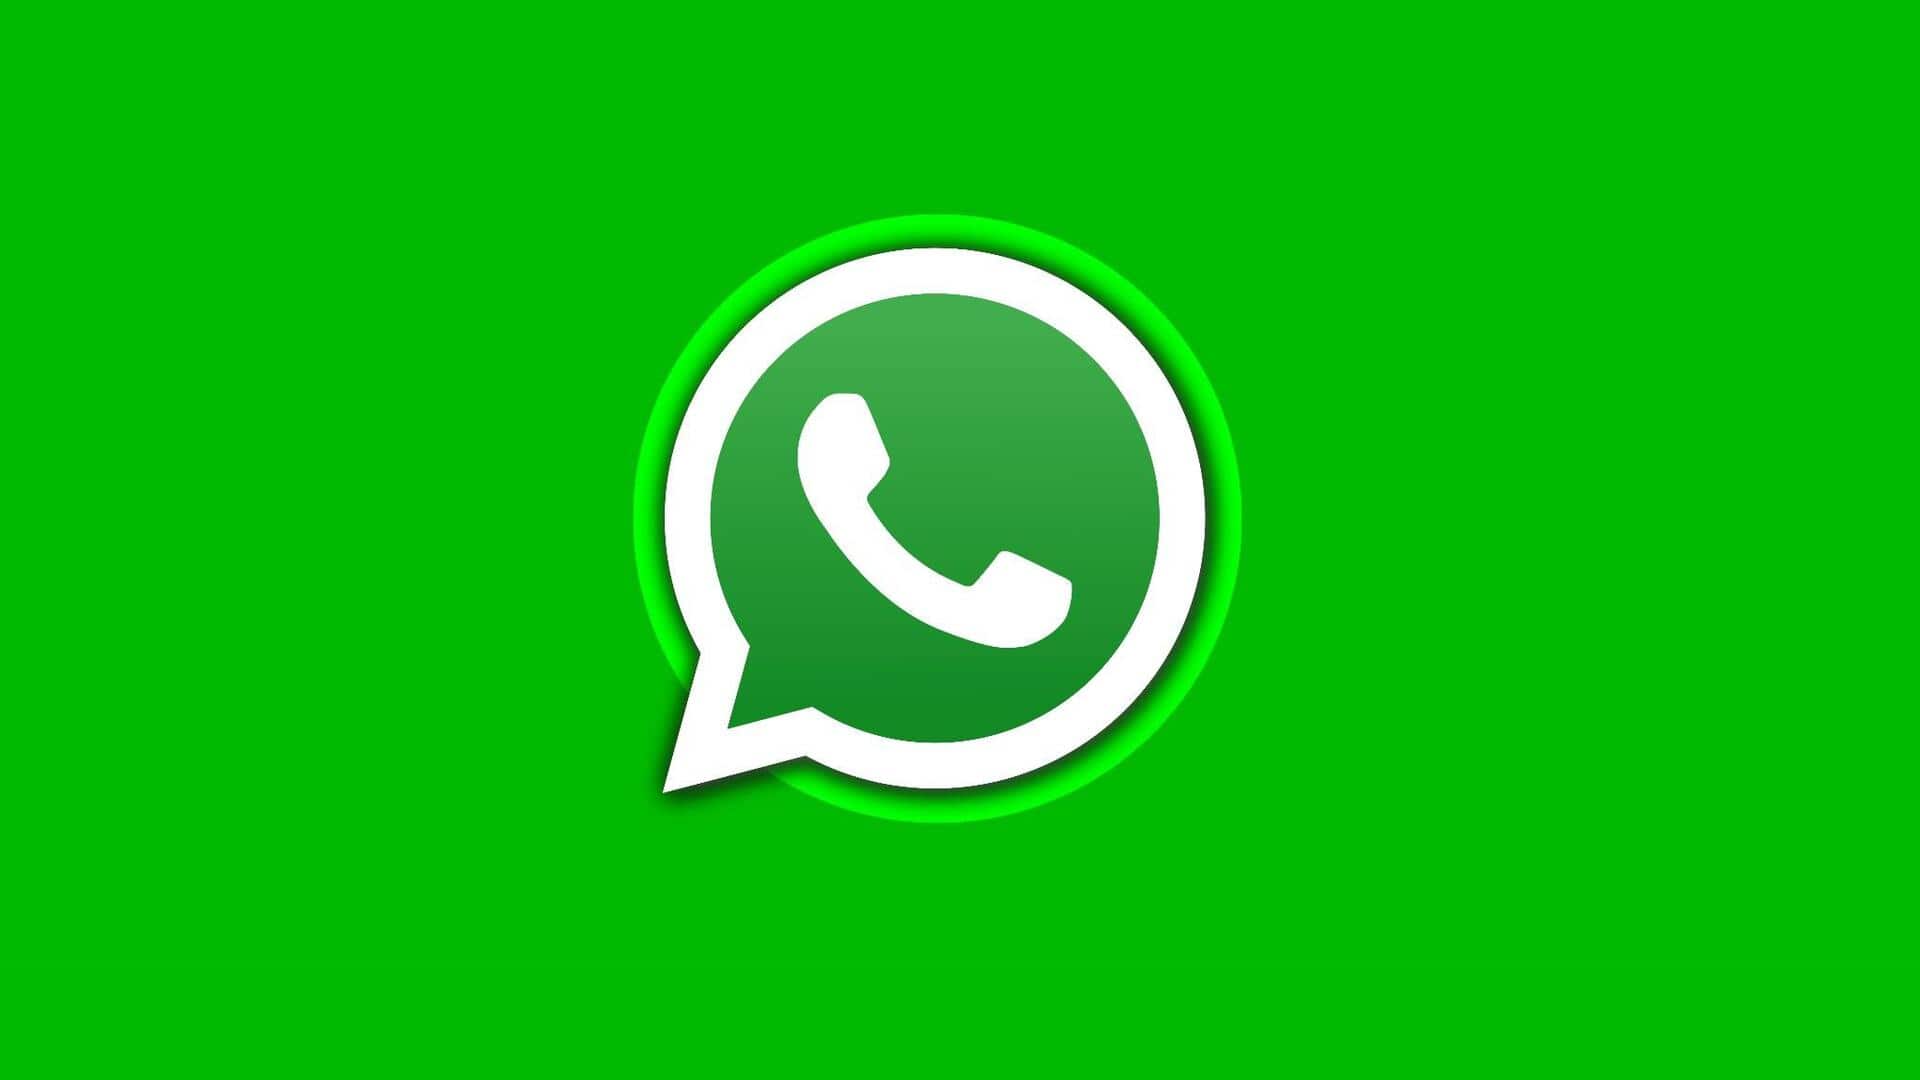 WhatsApp to block screenshots of profile pictures